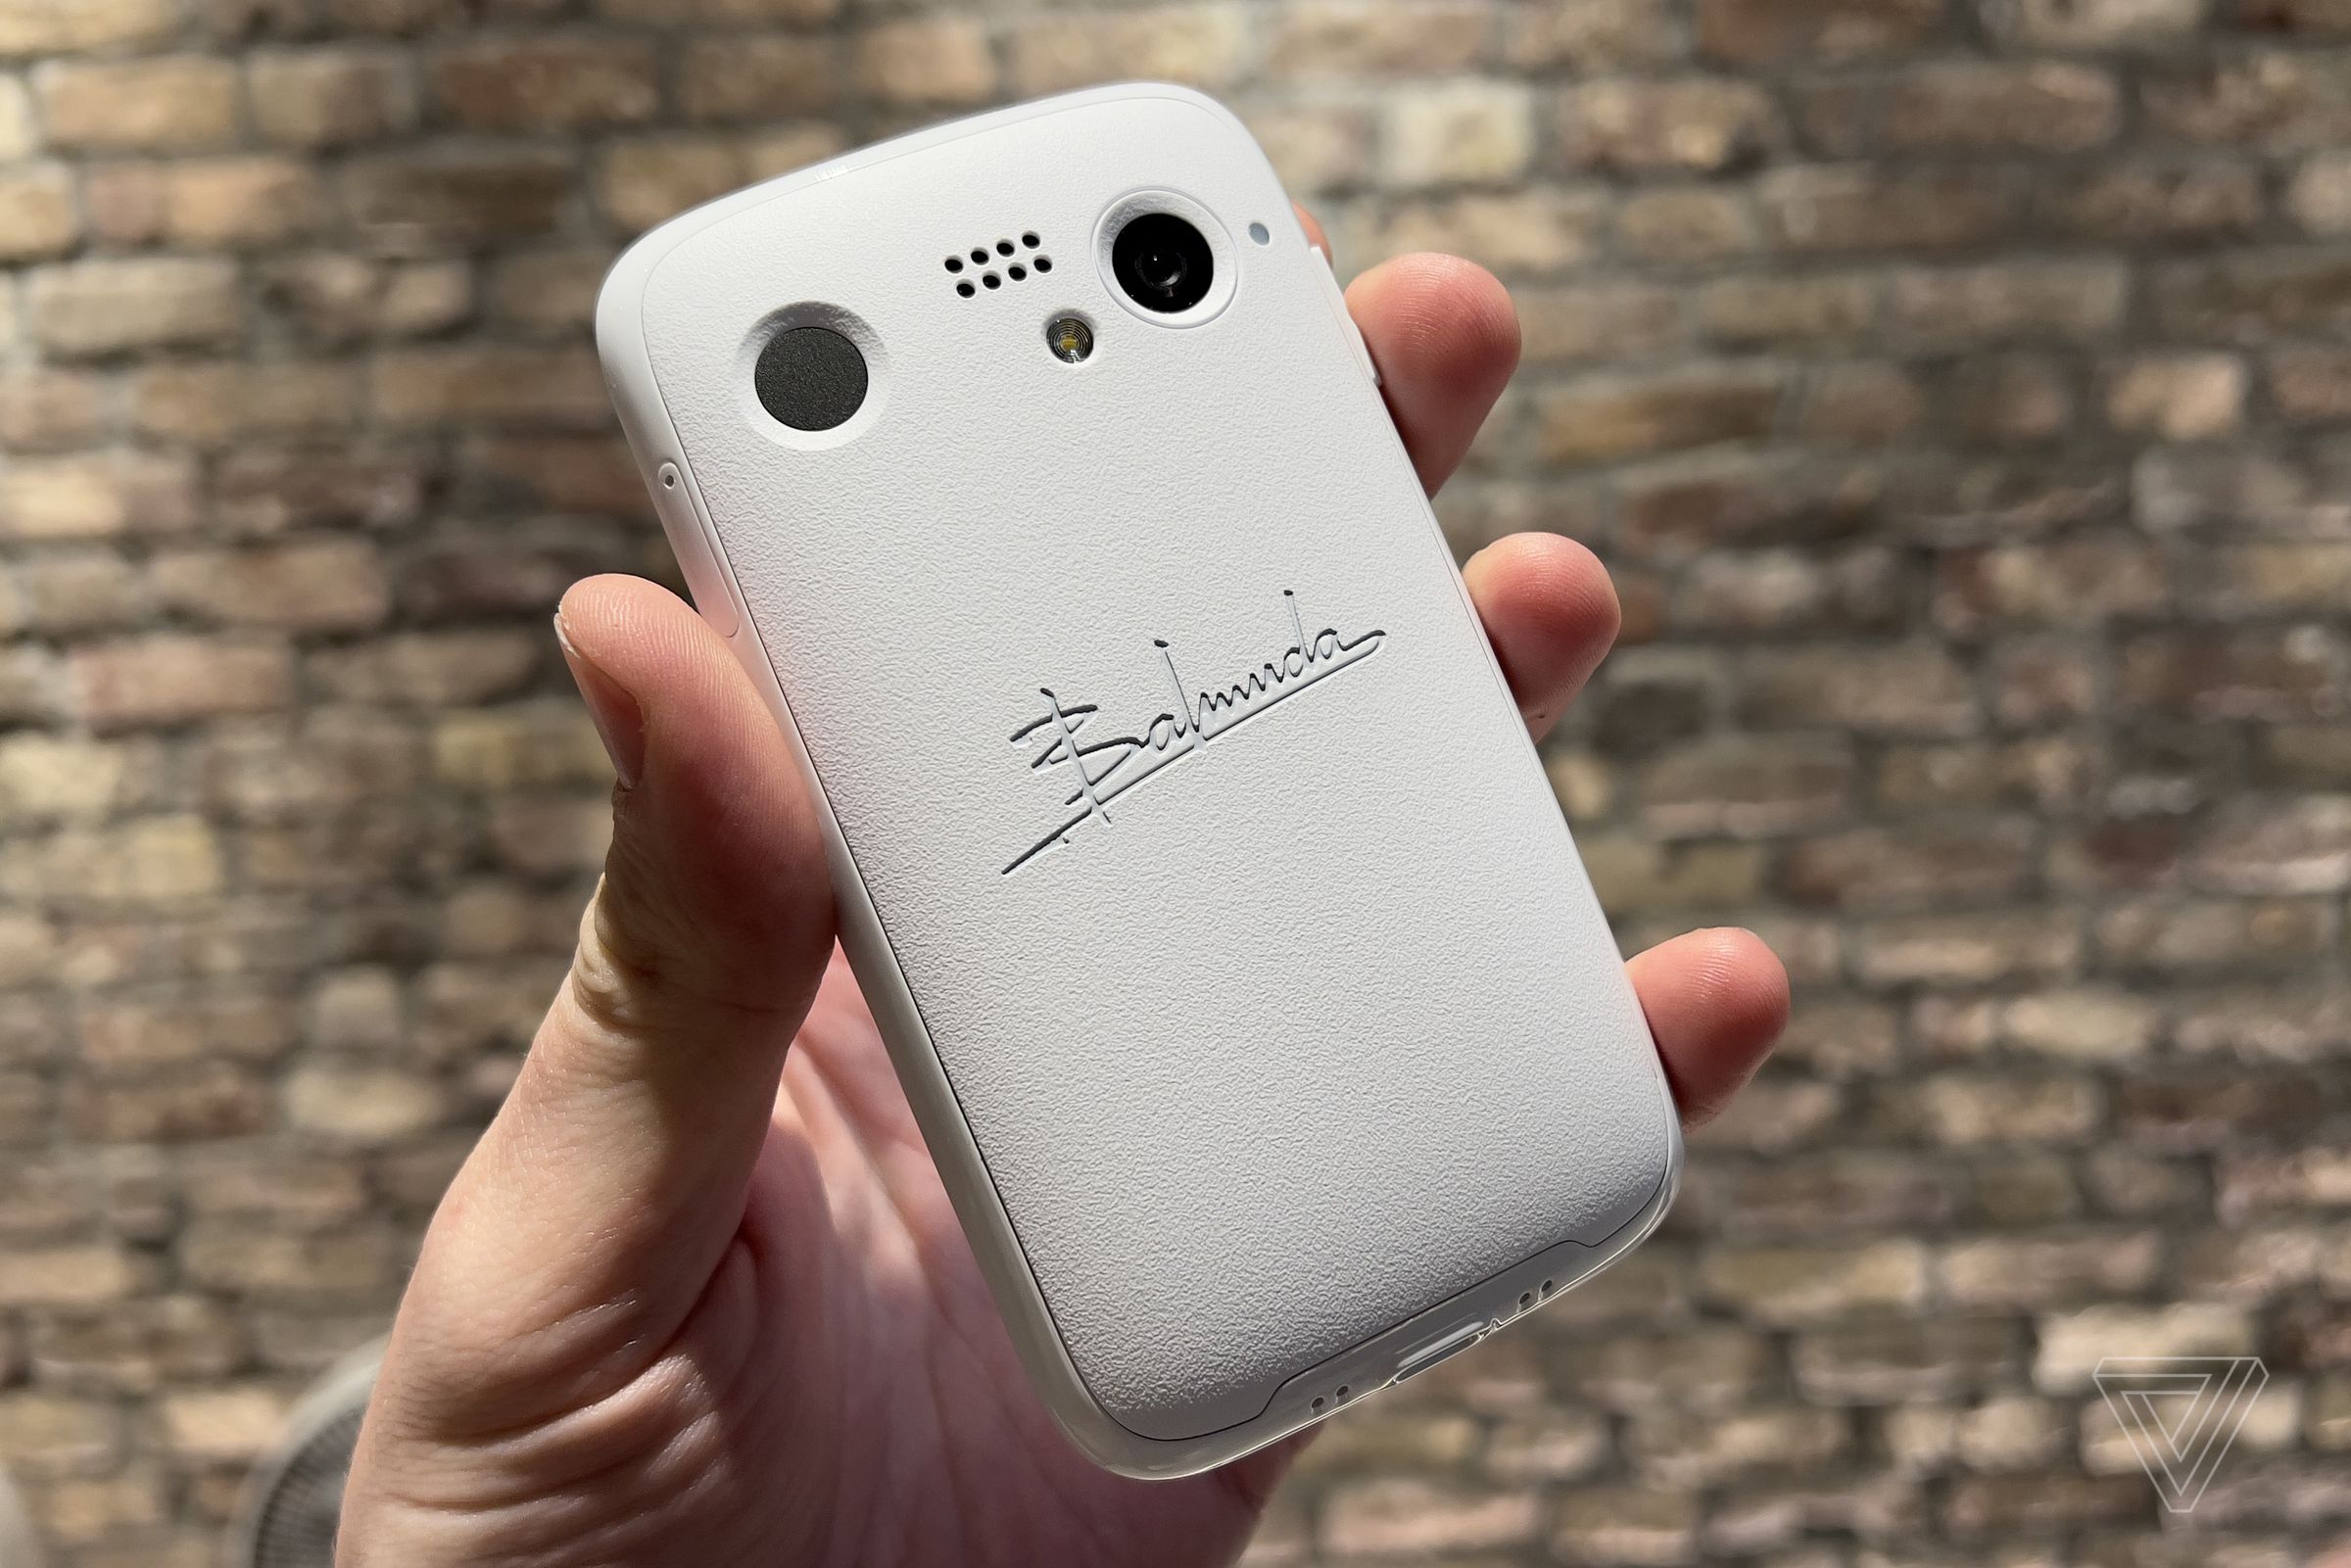 The Balmuda Phone has a textured plastic back and comes in black or white.